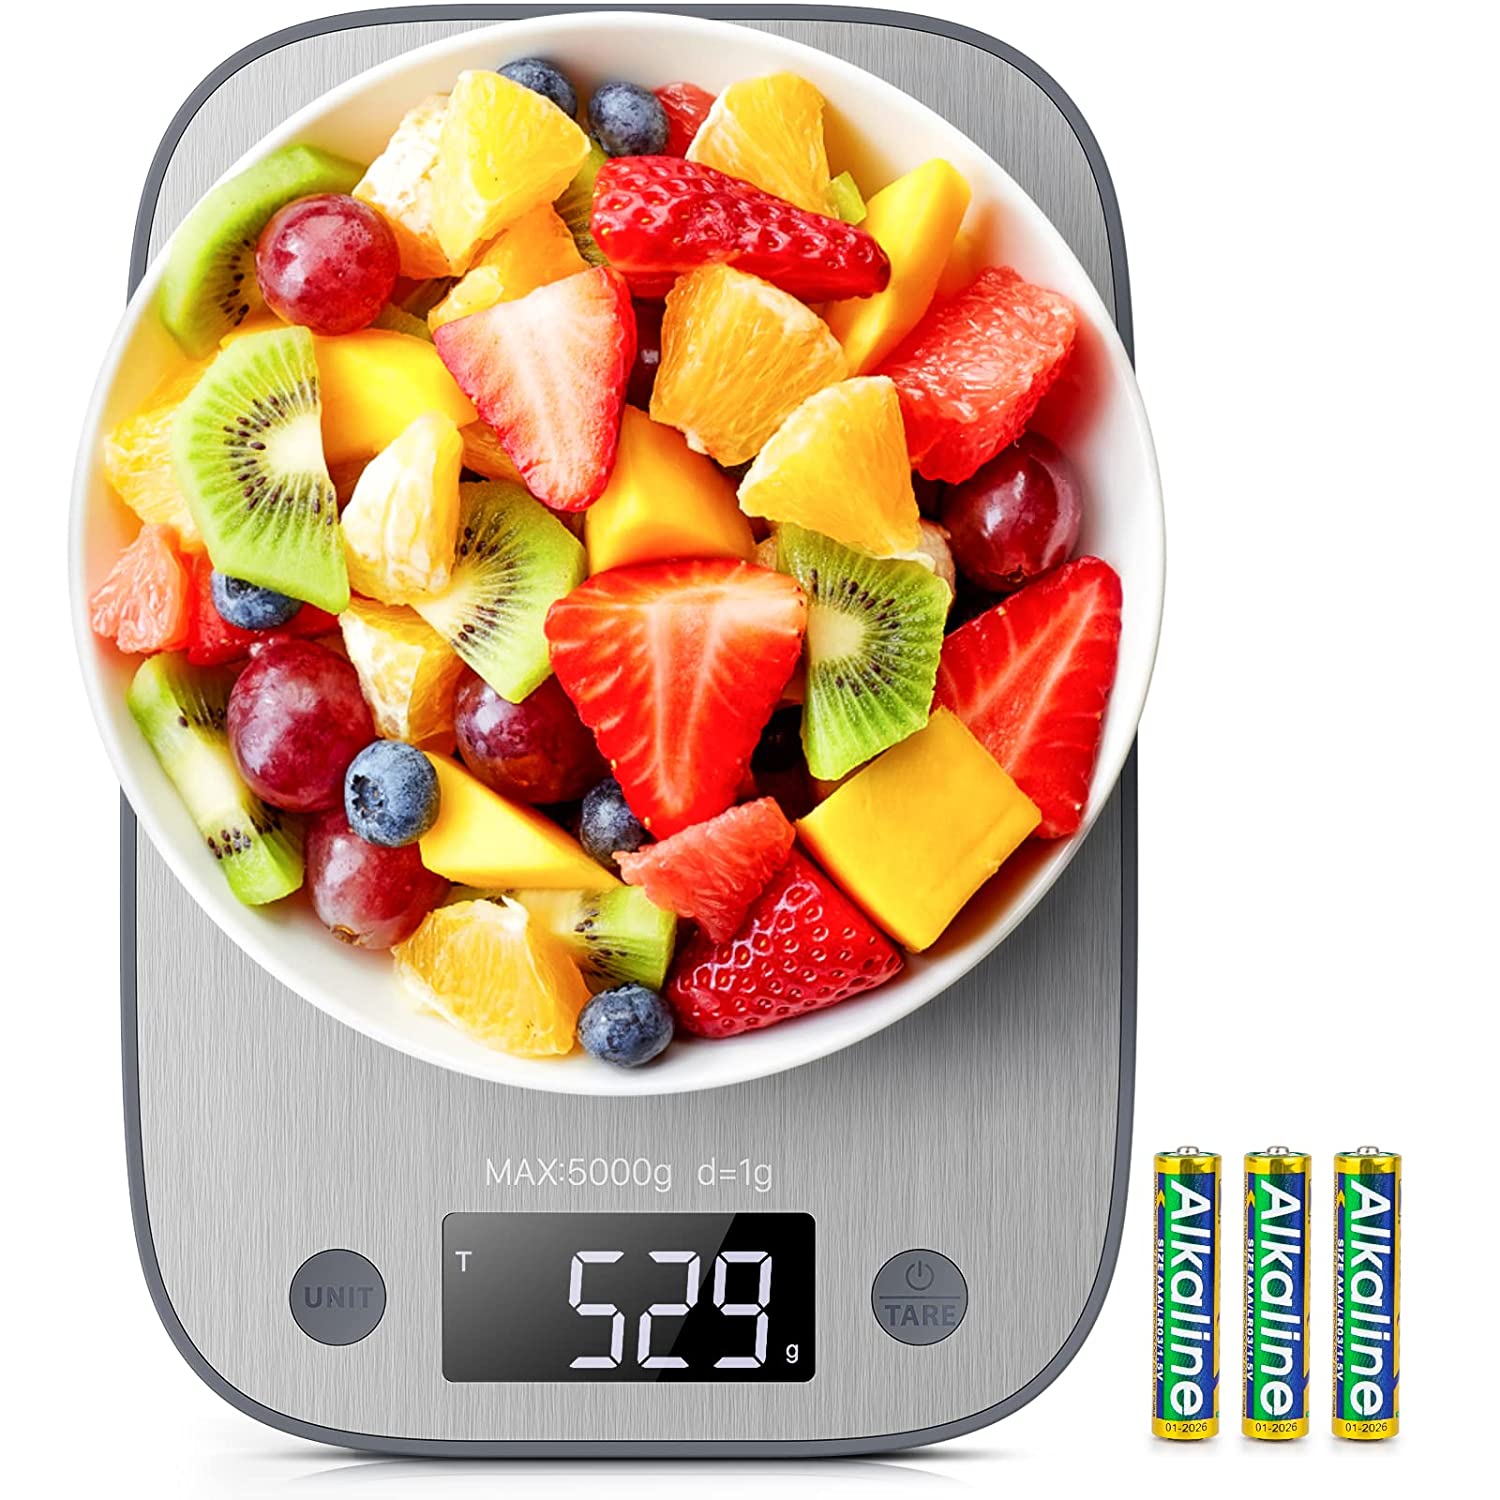 SIMPLETASTE Easy Tare Healthy Living Kitchen Scale